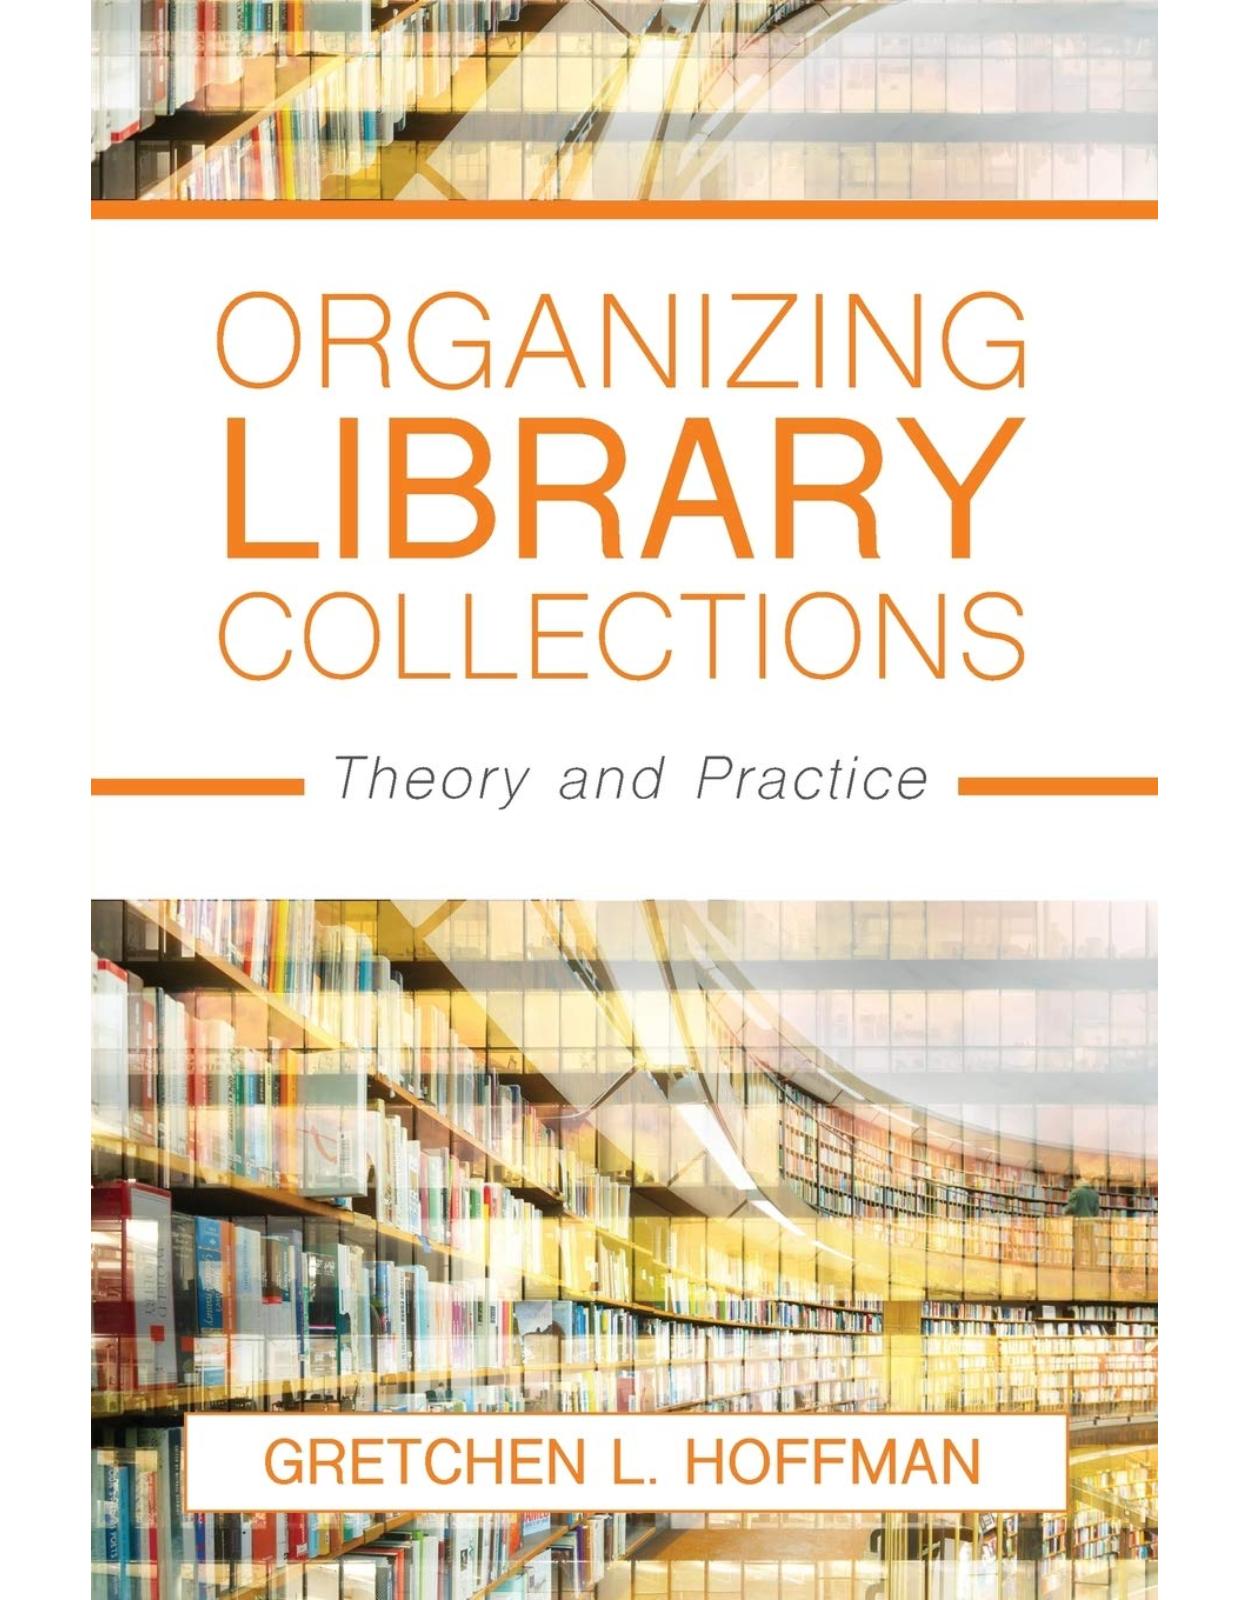 Organizing Library Collections. Theory and Practice